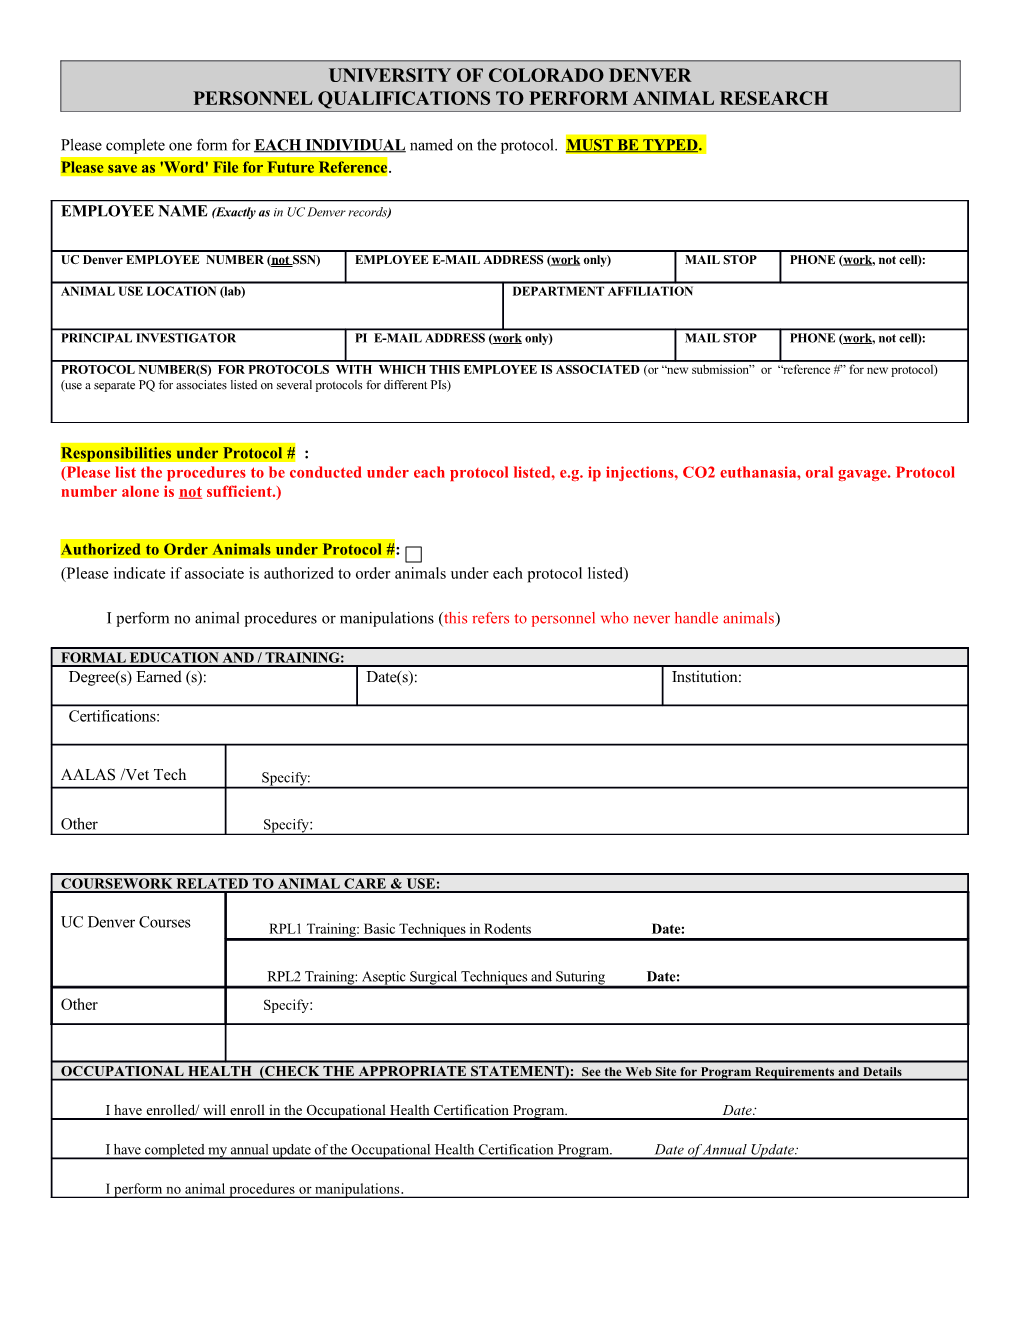 Personnel Qualifications Form